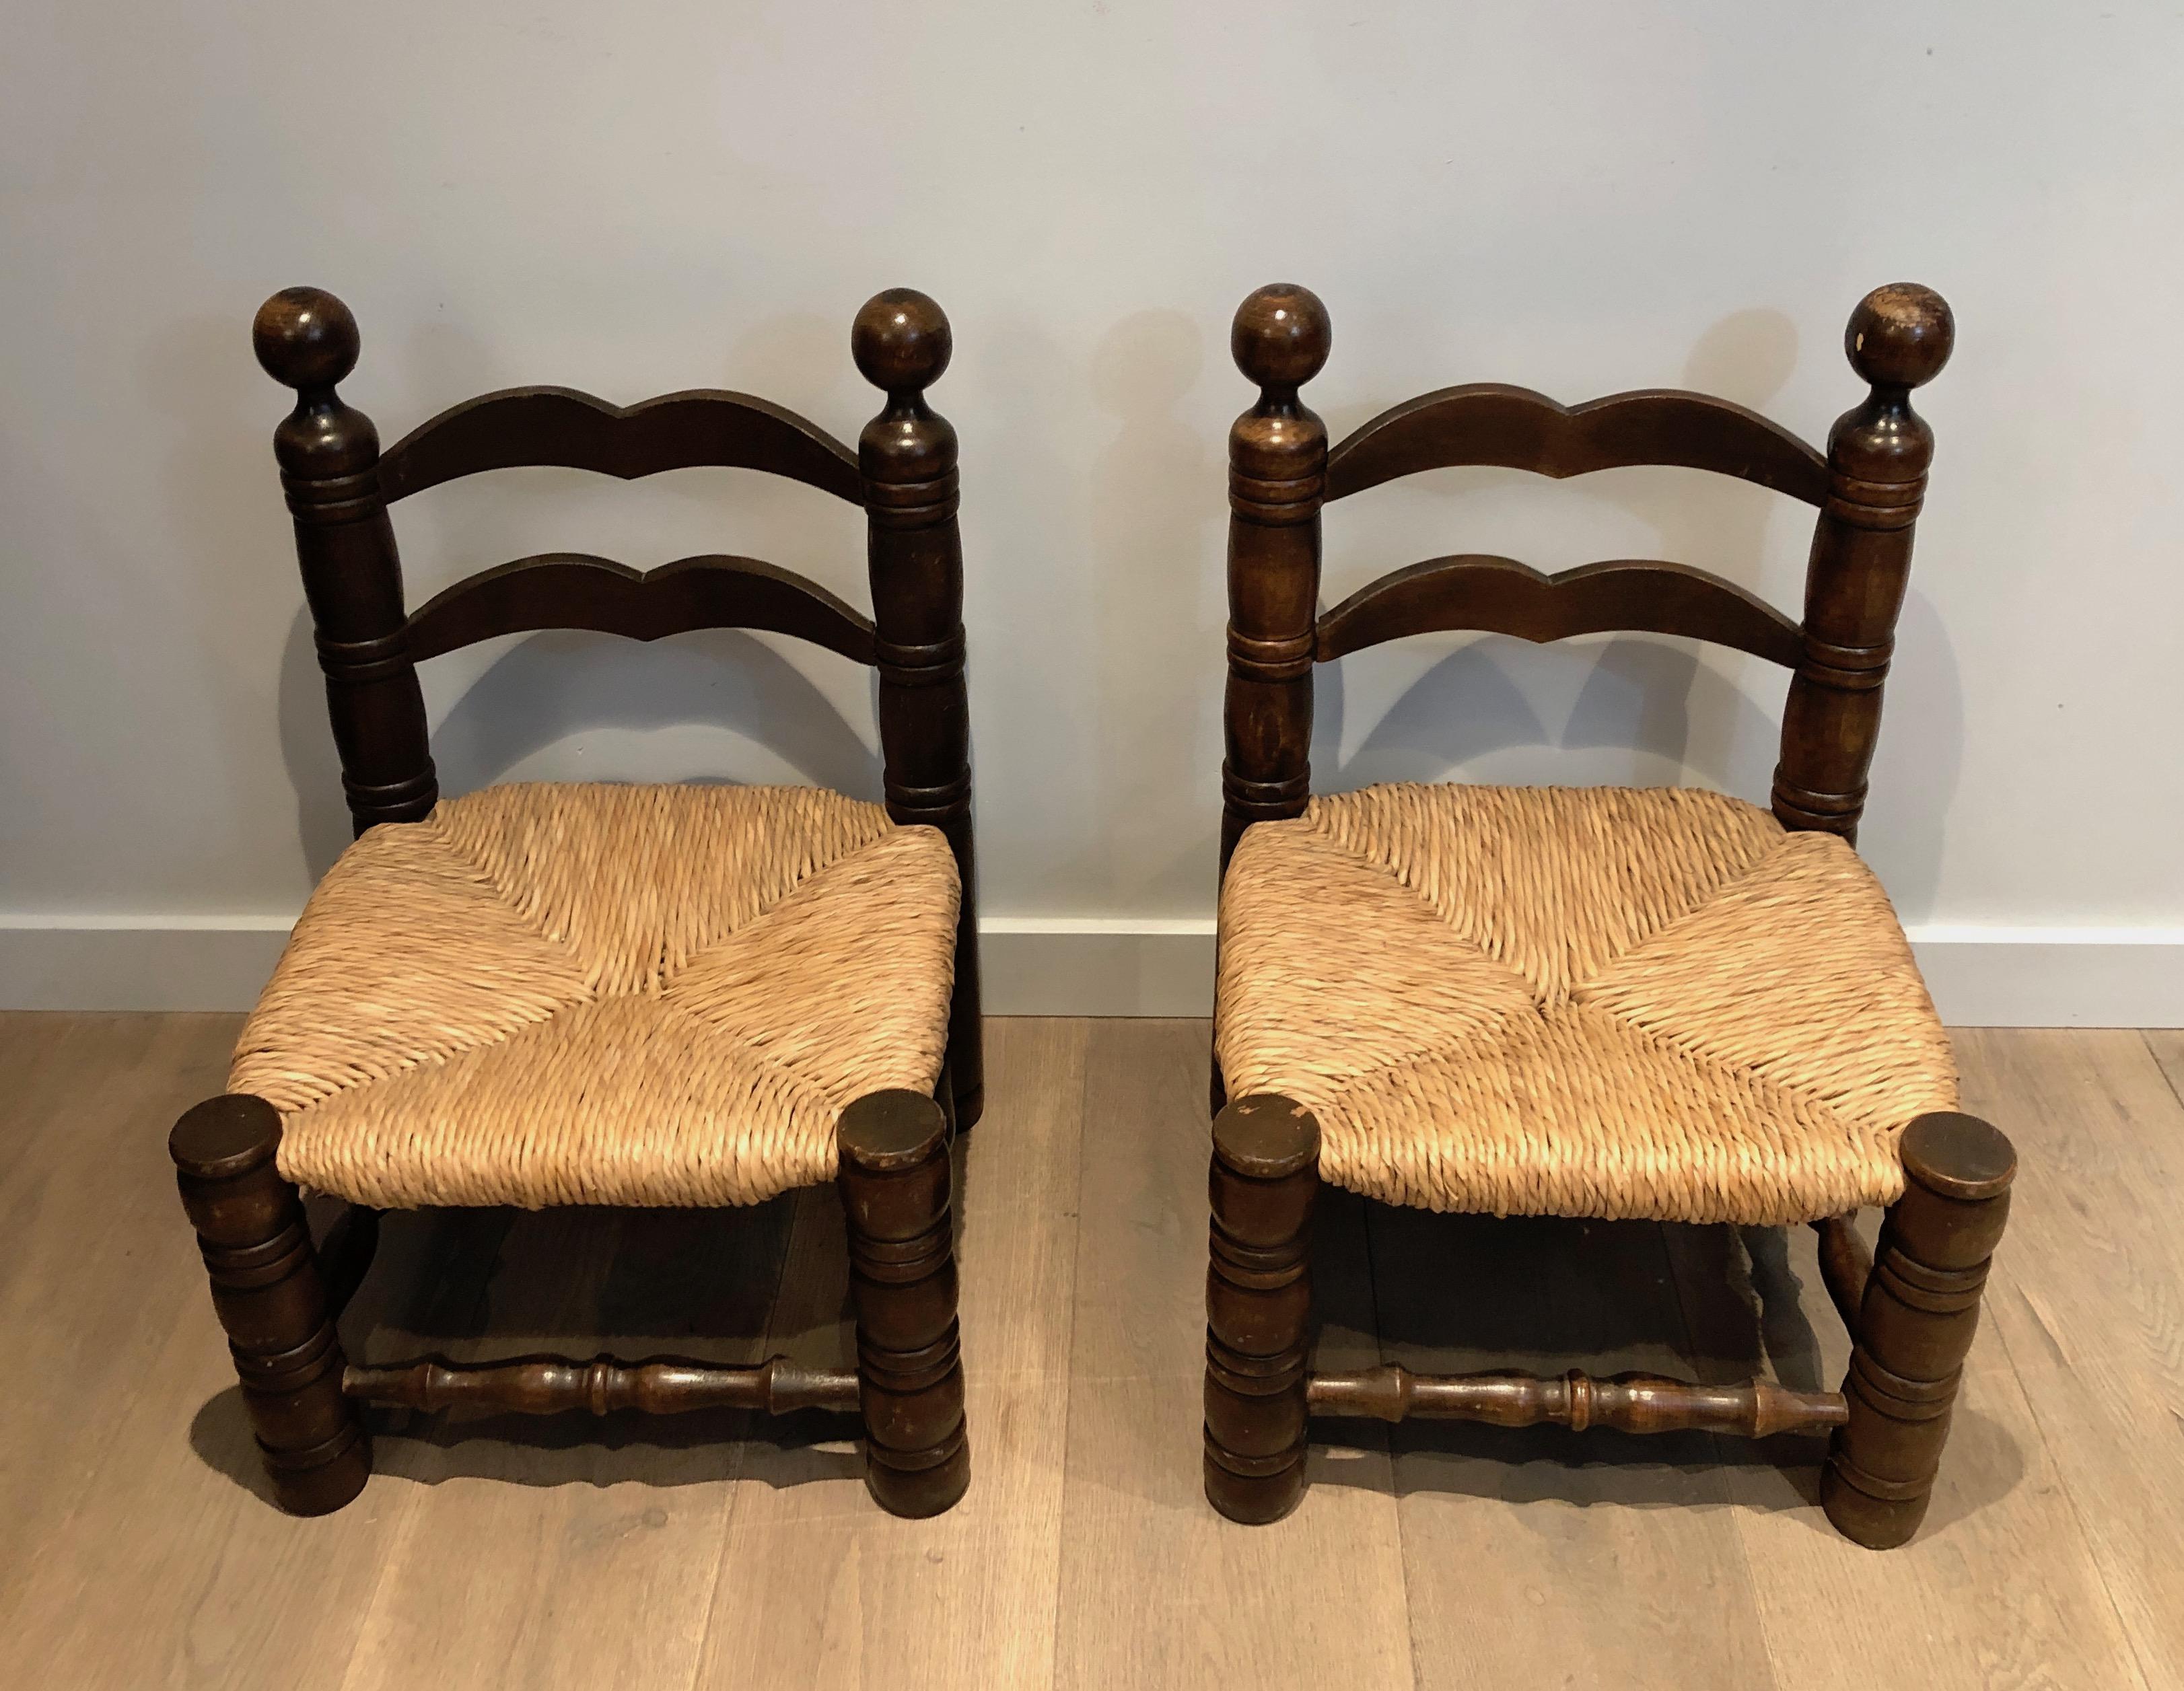 This pair of low brutalist chairs is made of carved wood and straw. This is a French work by Charles Dudouyt. Circa 1920.
